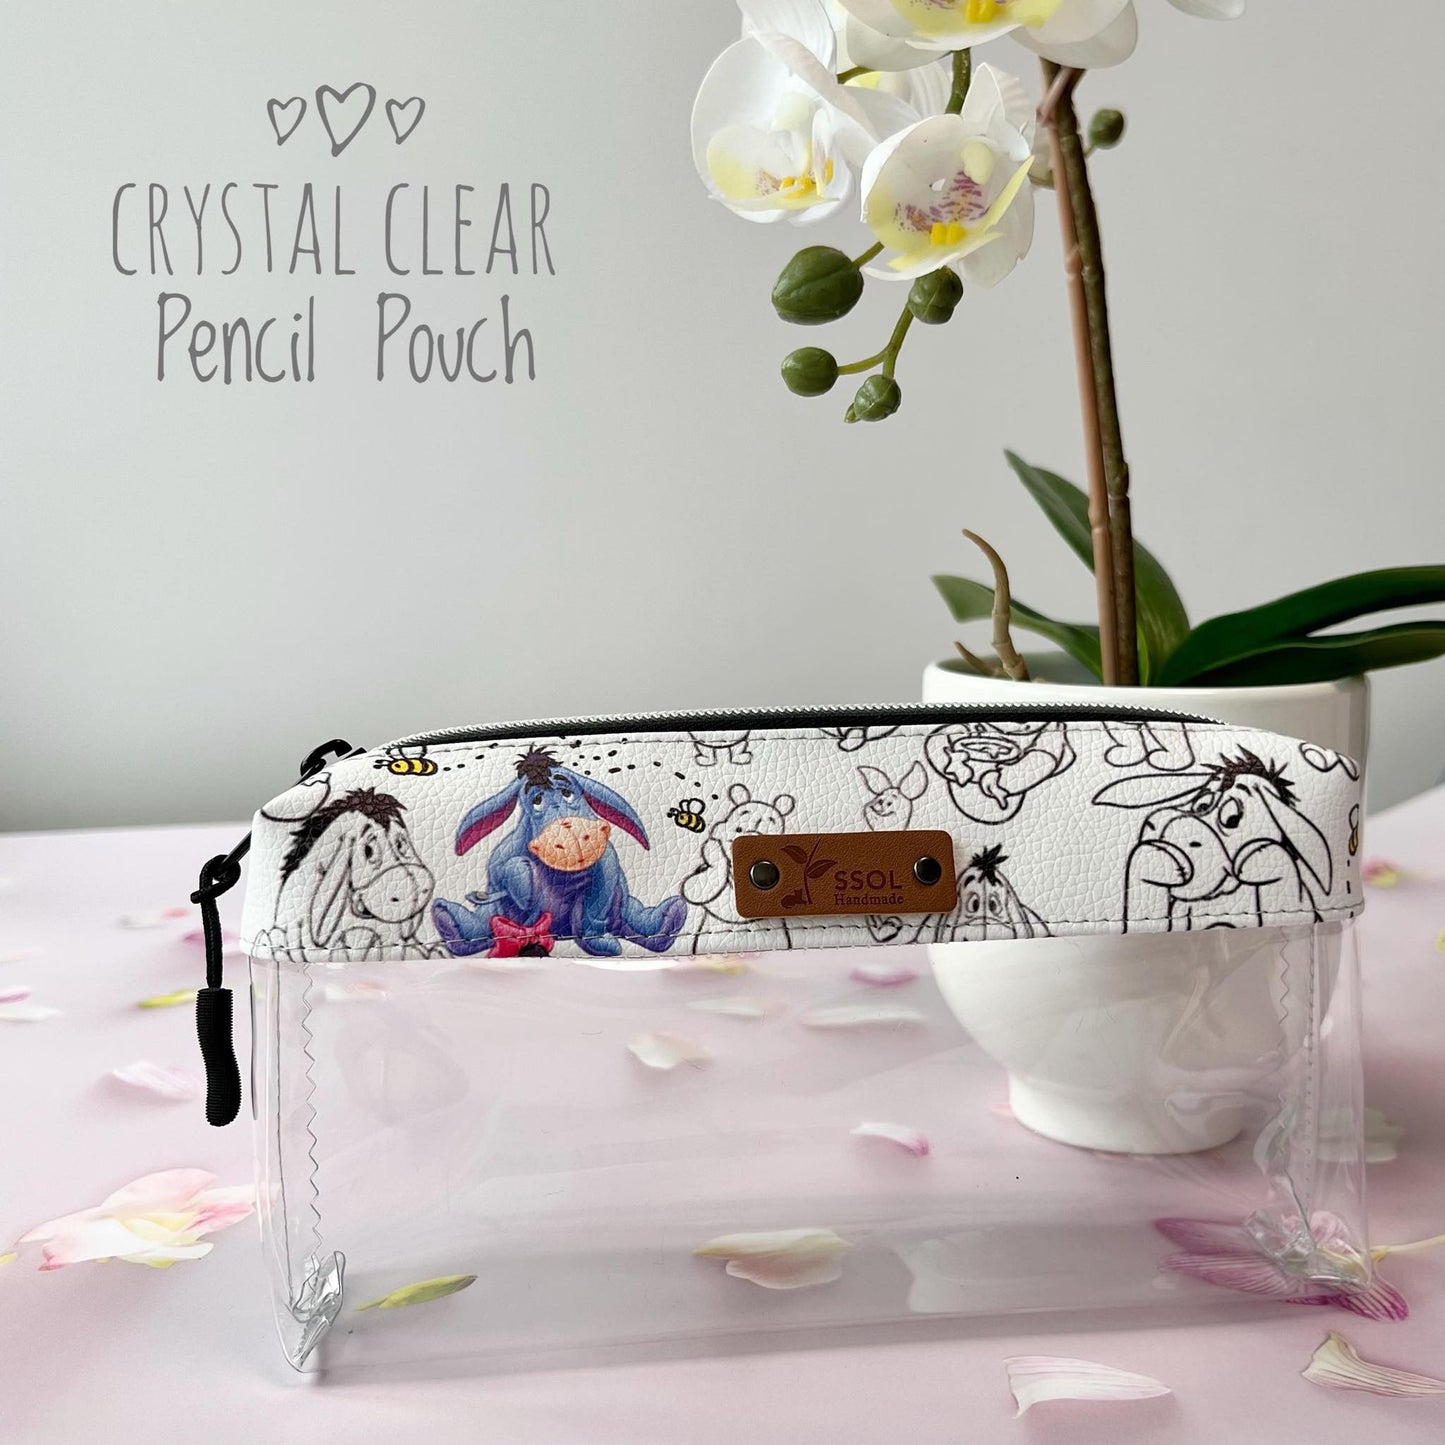 Crystal Clear Pencil Pouch - CCPP01